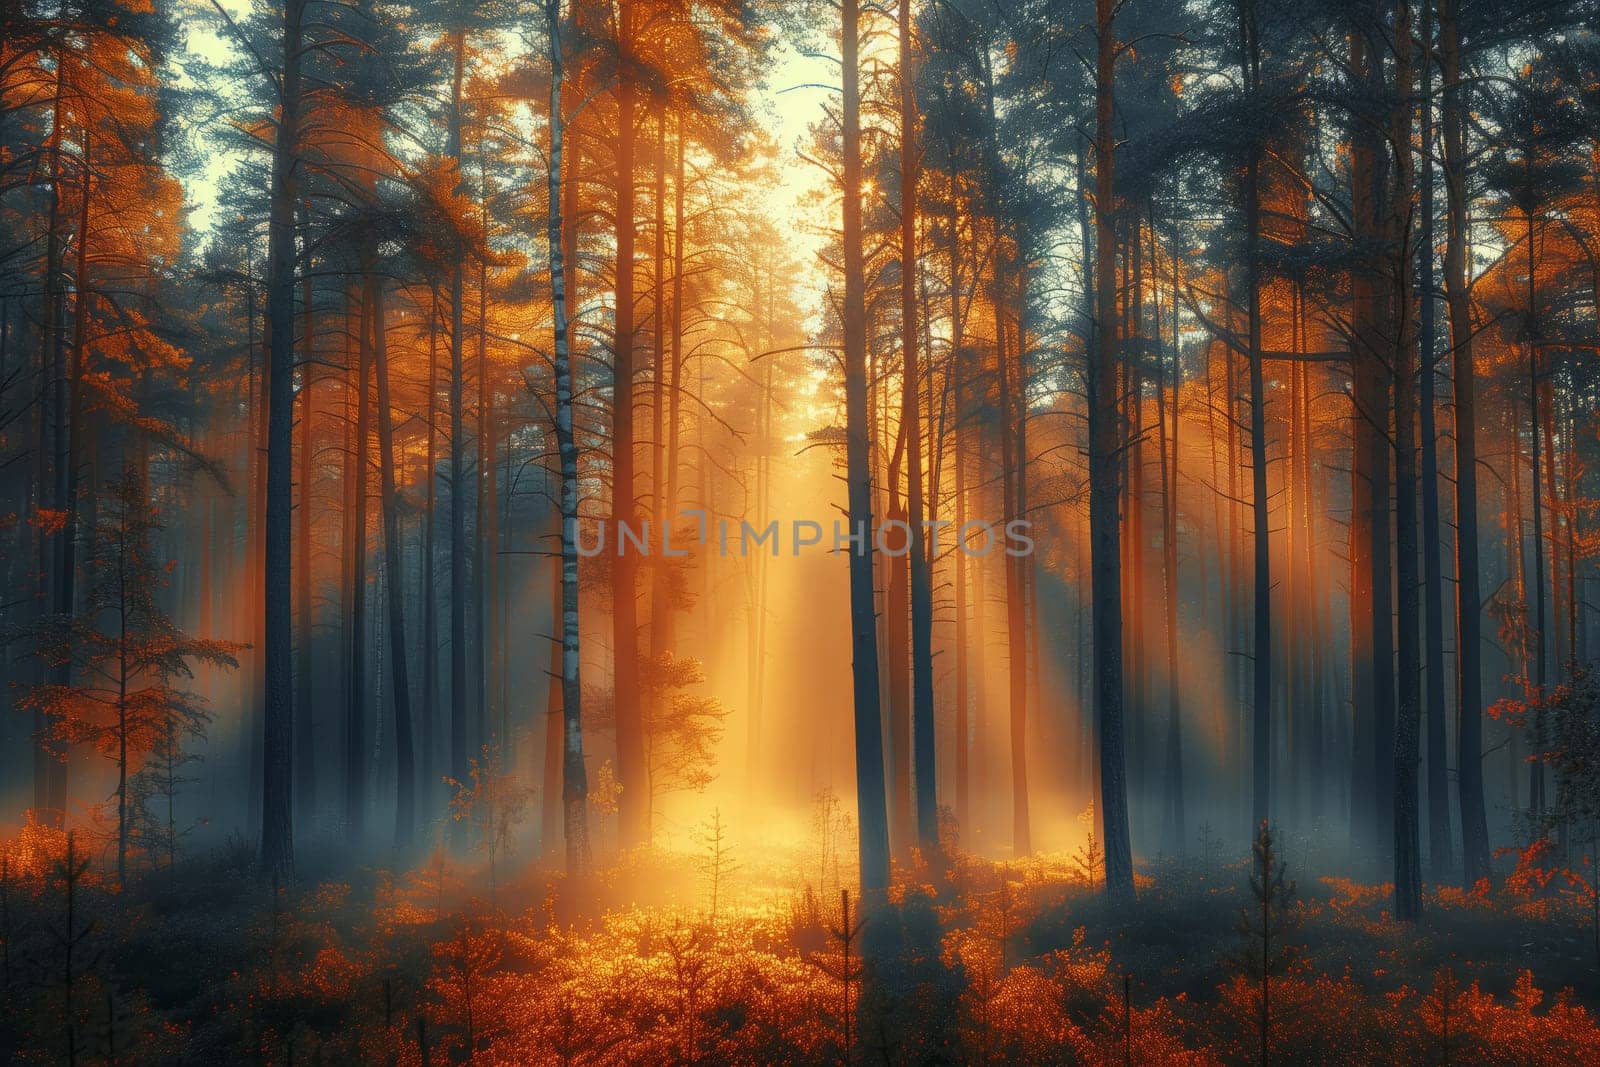 The sun casts tints and shades through the forest trees by richwolf